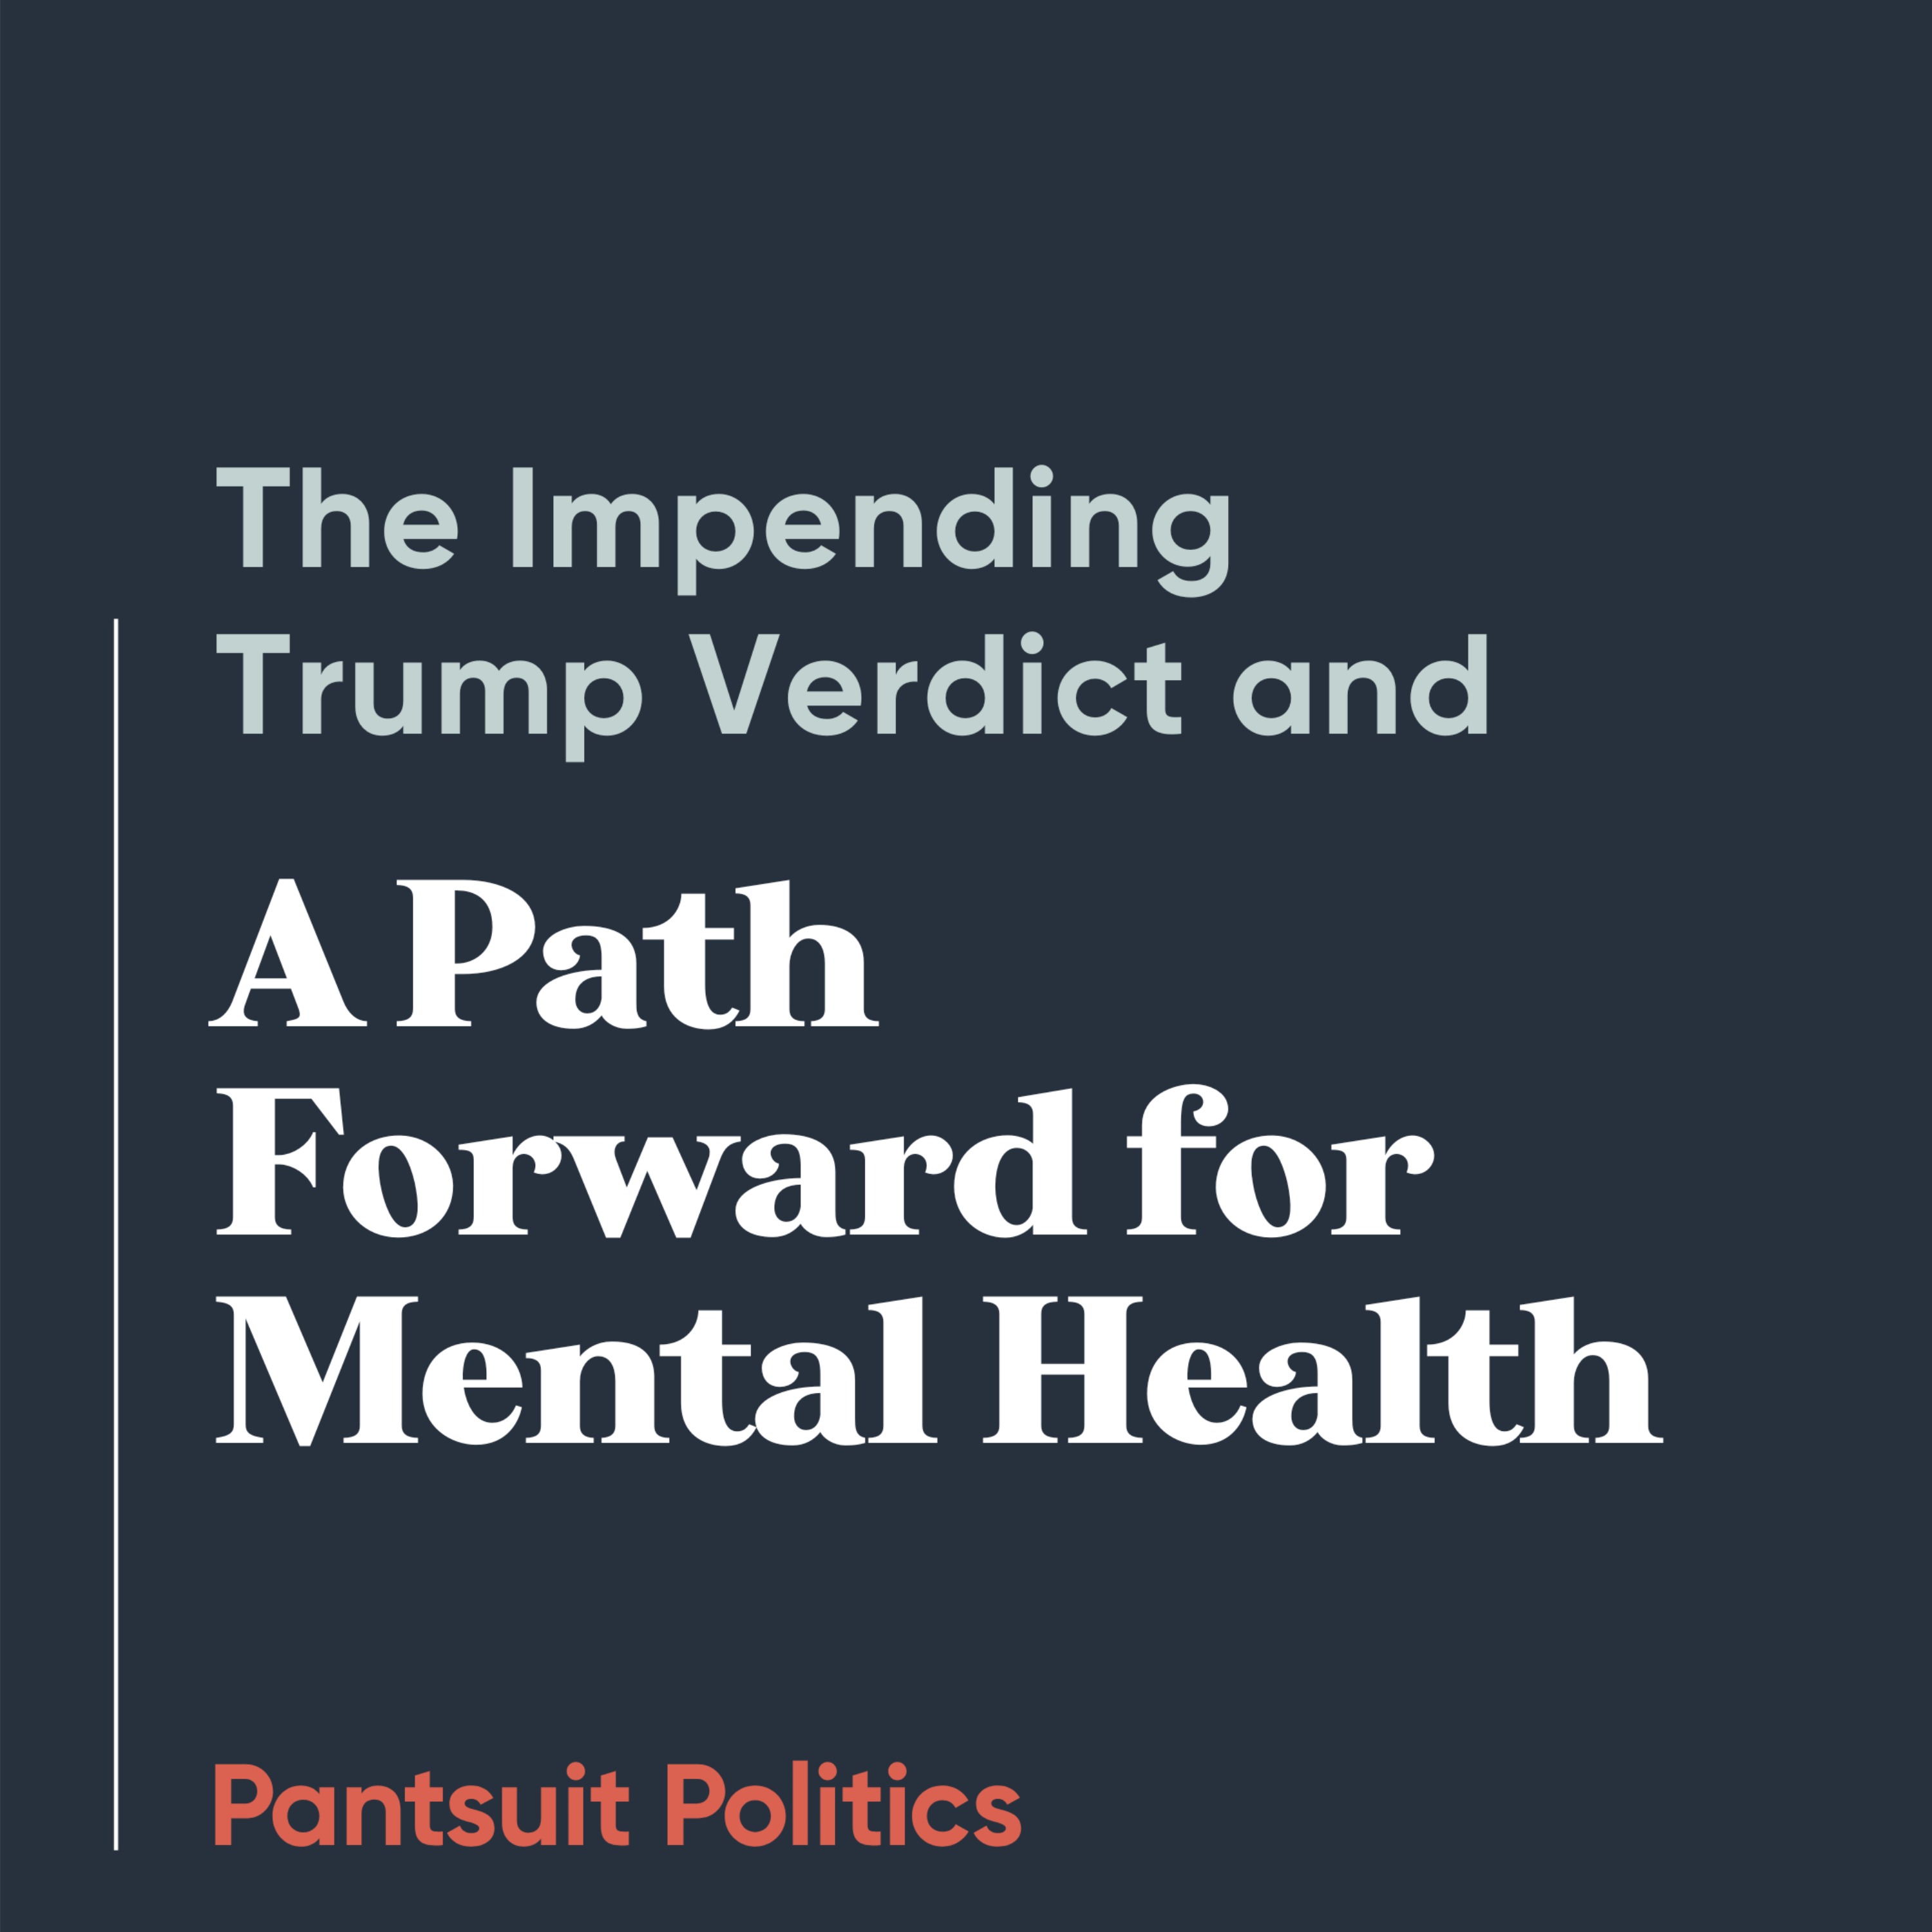 The Impending Trump Verdict and a Path Forward for Mental Health